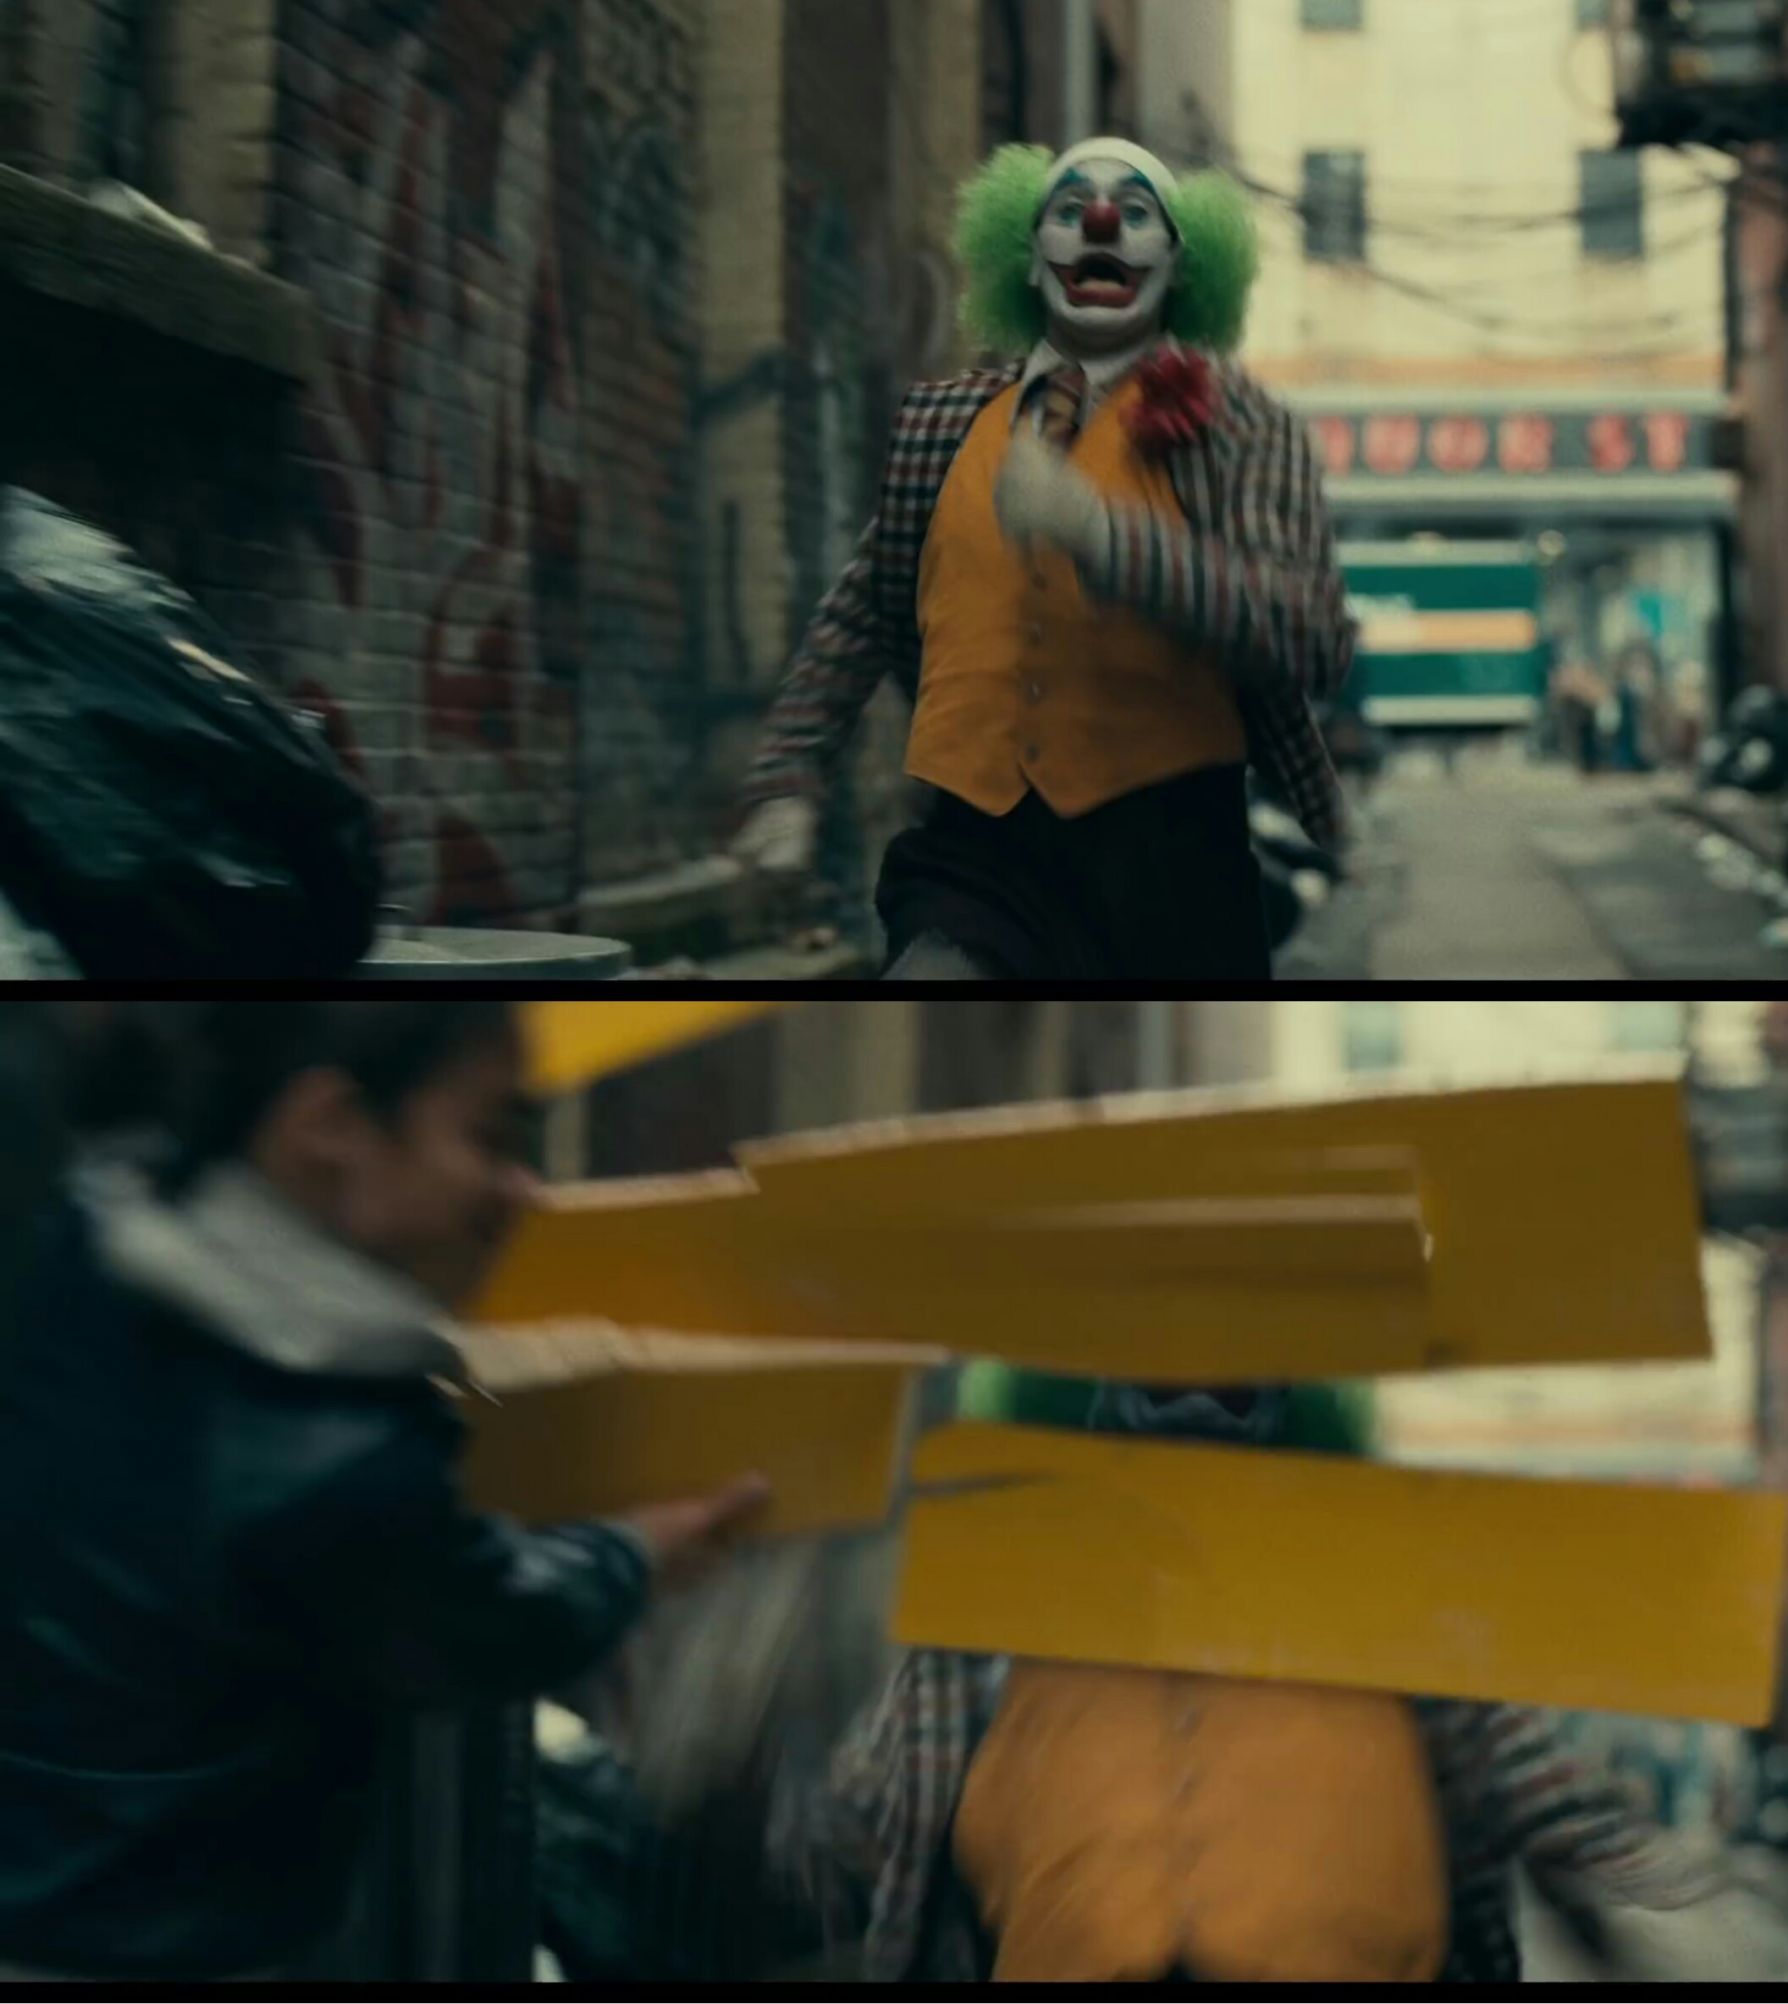 No "joker smashed" memes have been featured yet. 